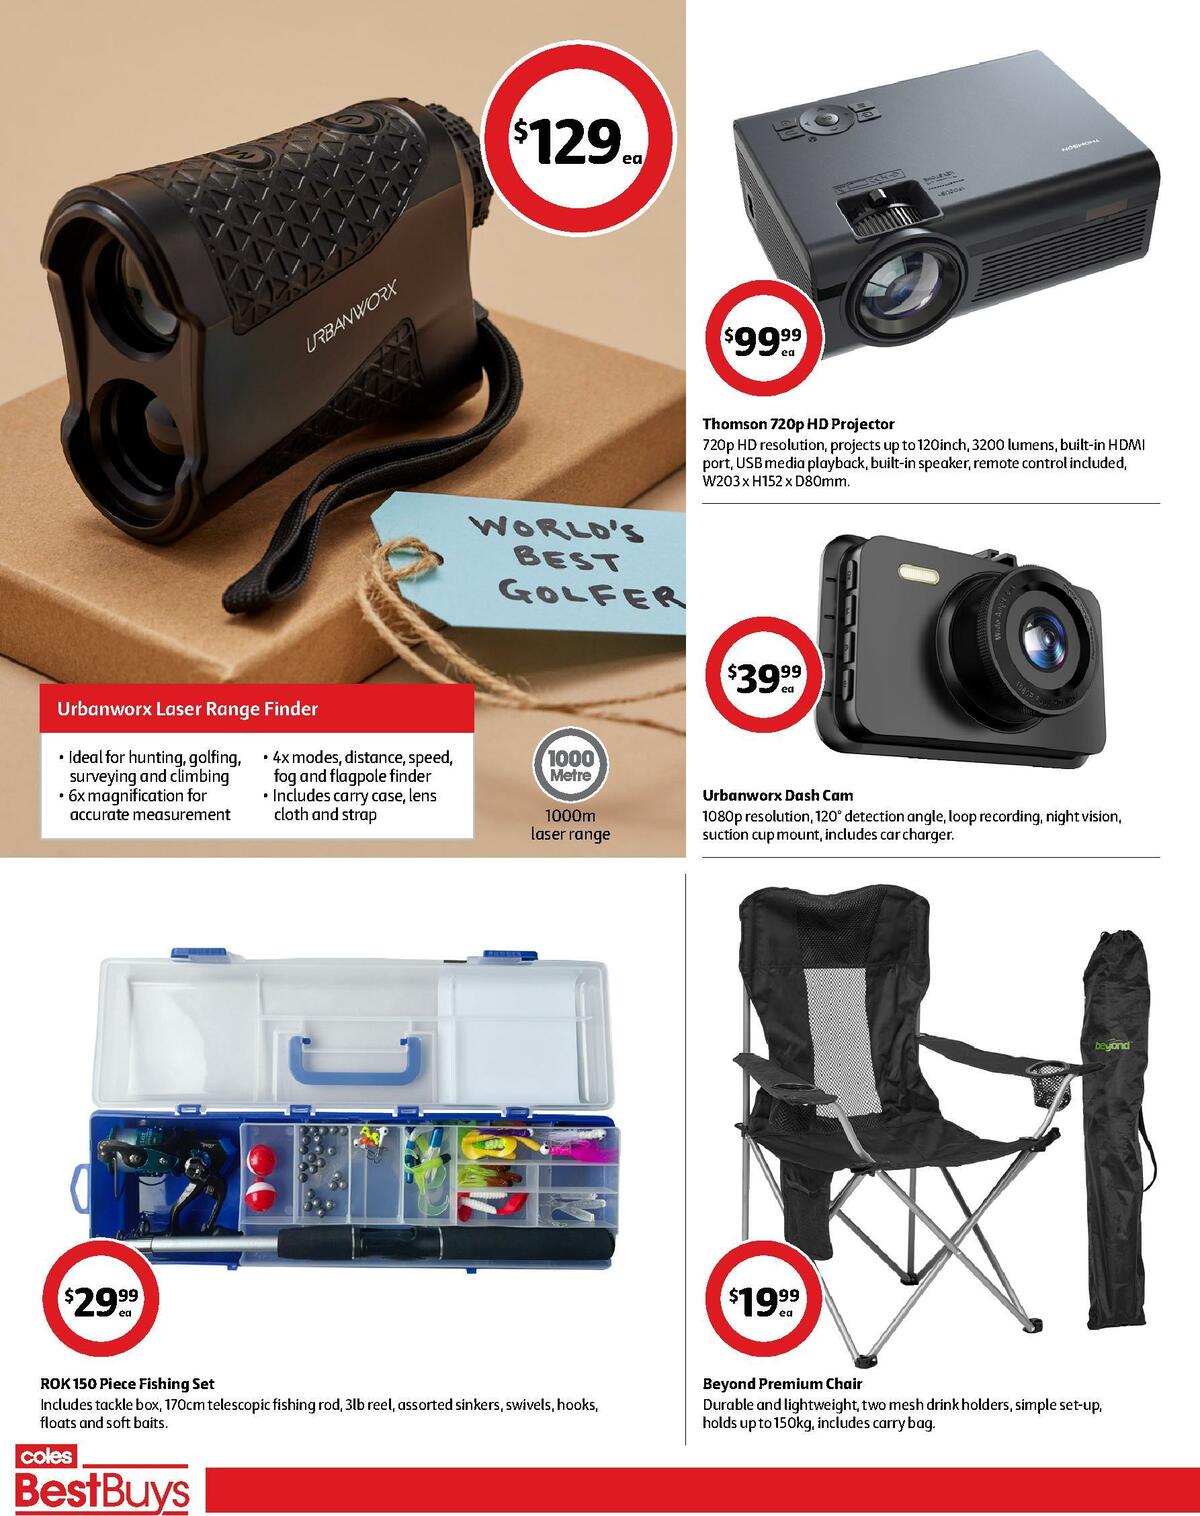 Coles Best Buys - Perfect for Father's Day Catalogues from 19 August